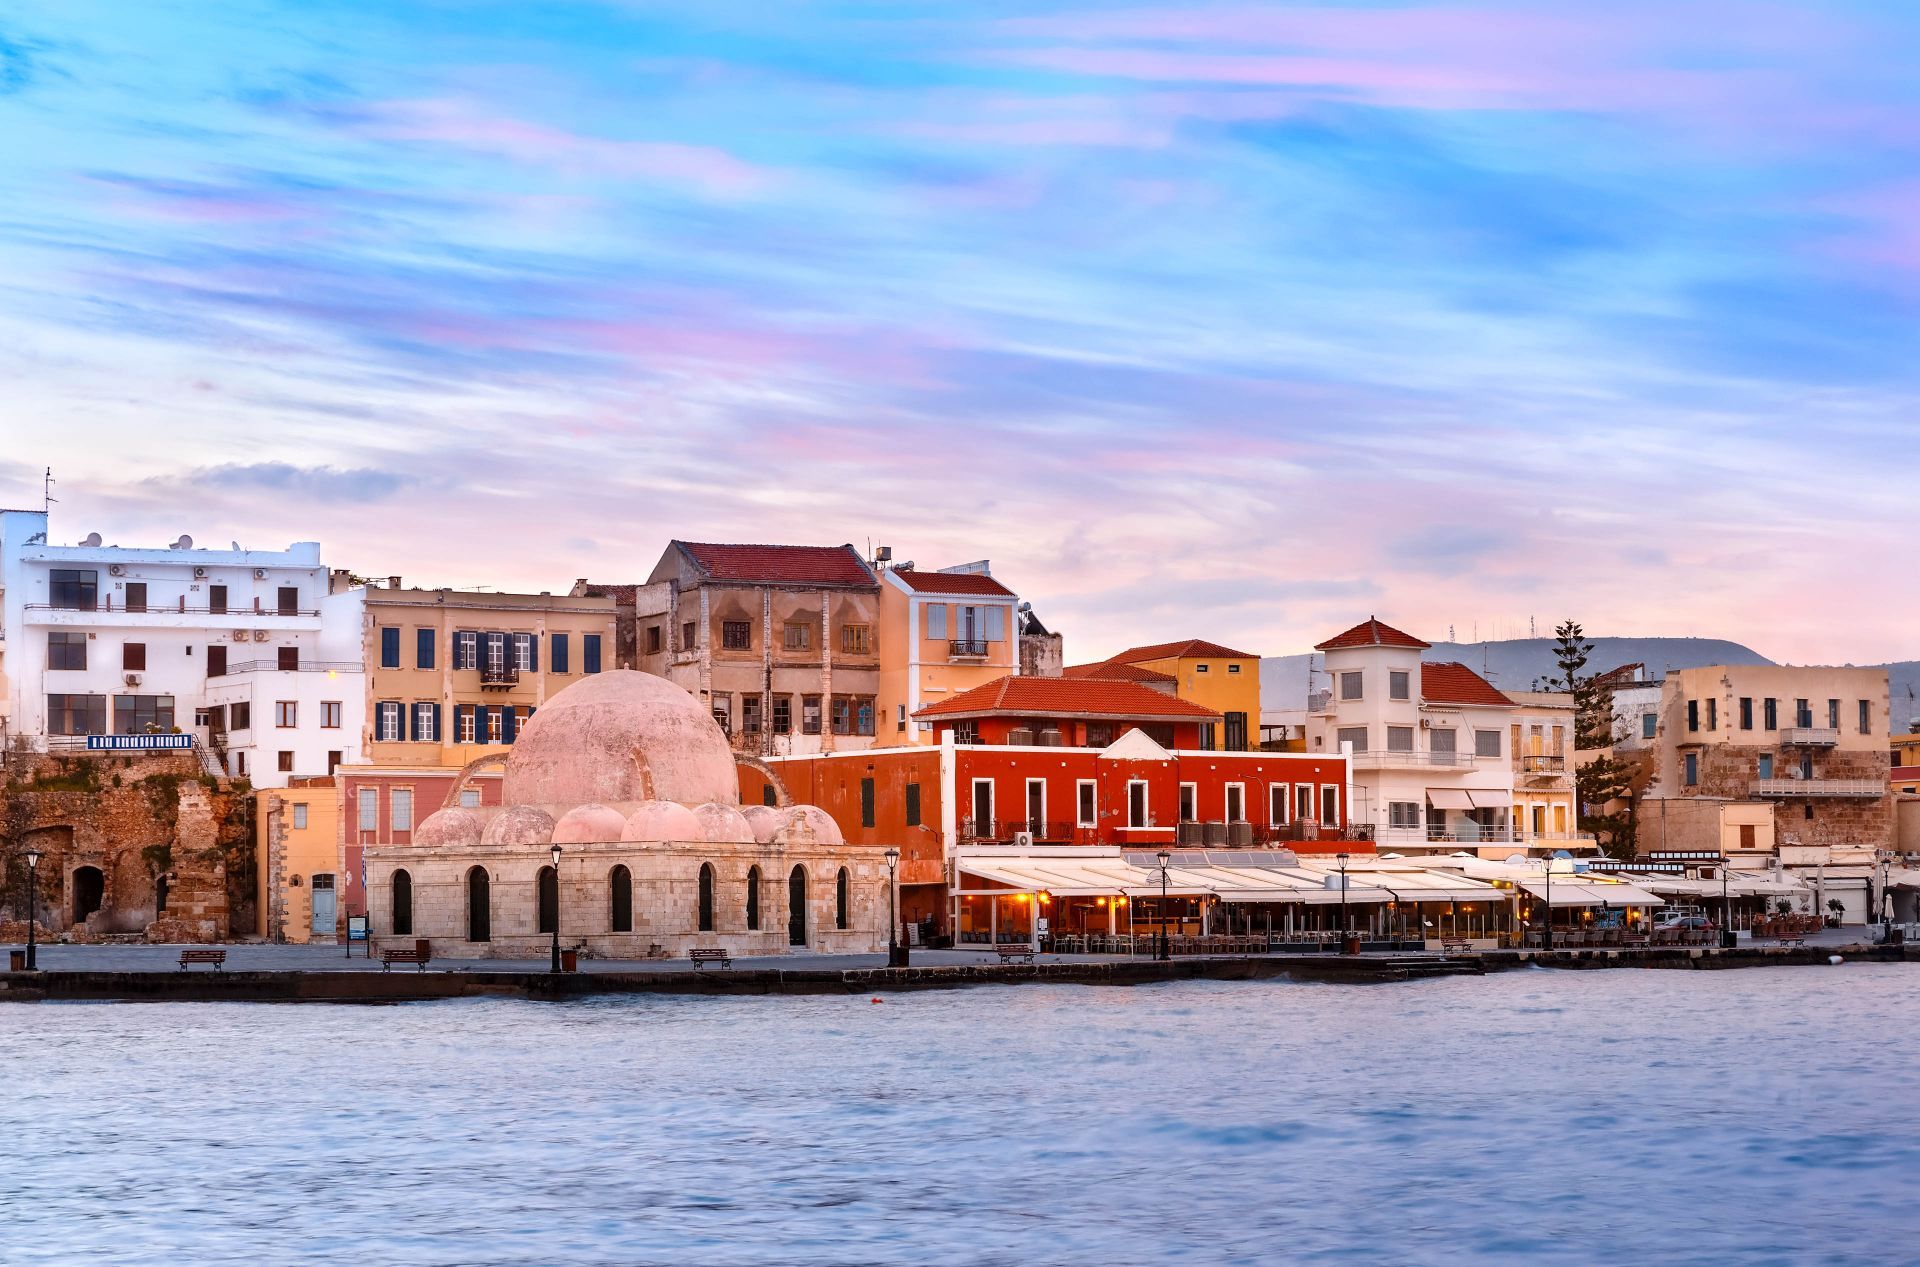 The old harbor of Chania town